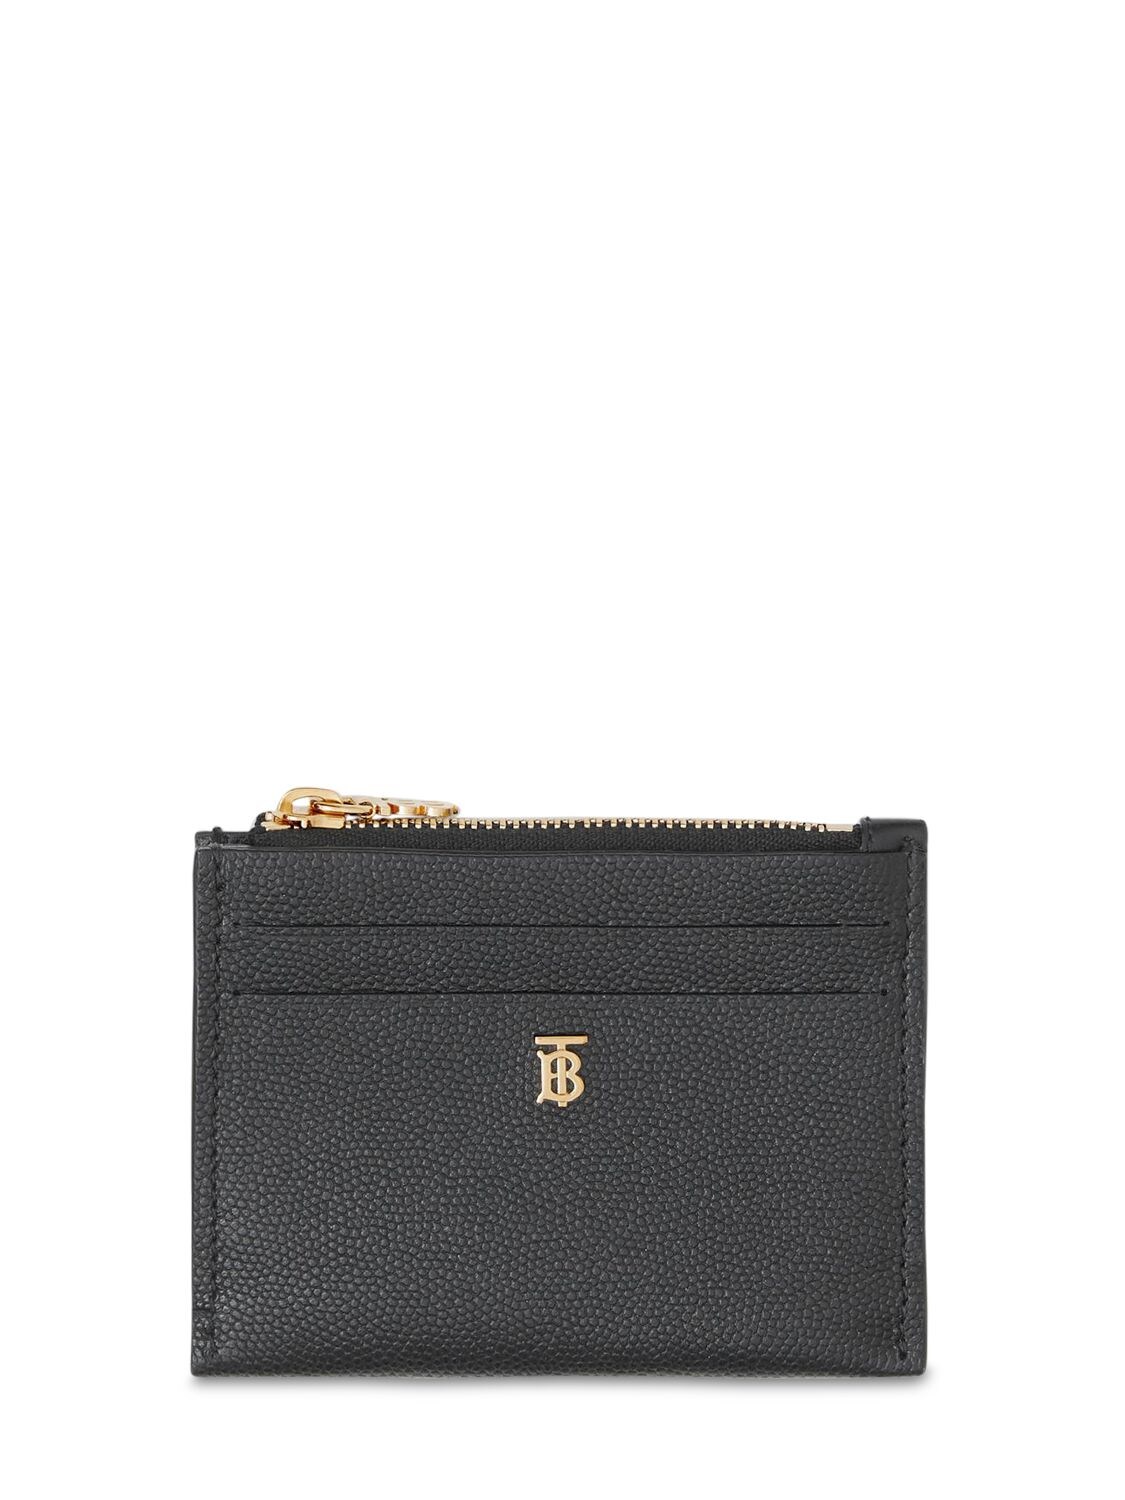 BURBERRY SIMONE GRAINED LEATHER CARD HOLDER,72ID1H063-QTEXODK1